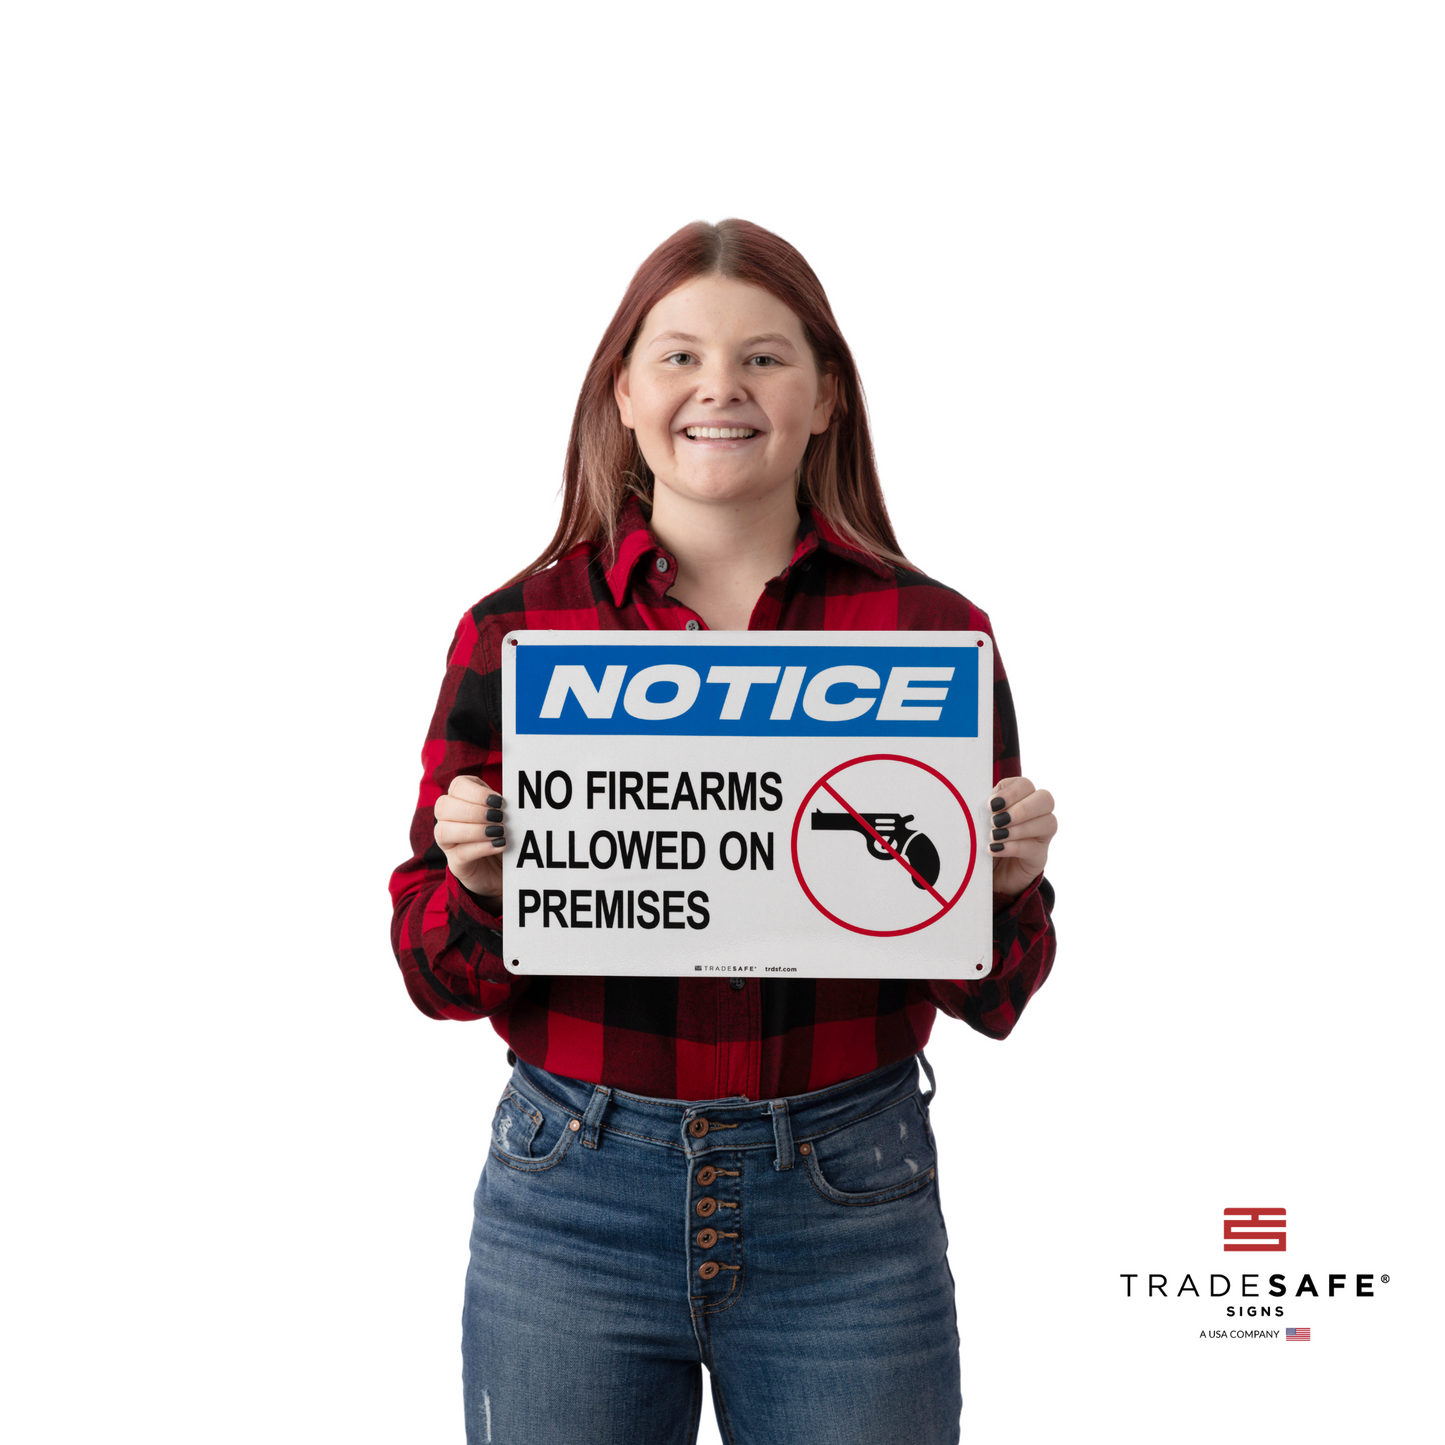 a person holding a notice sign with the text "no firearms allowed on premises"